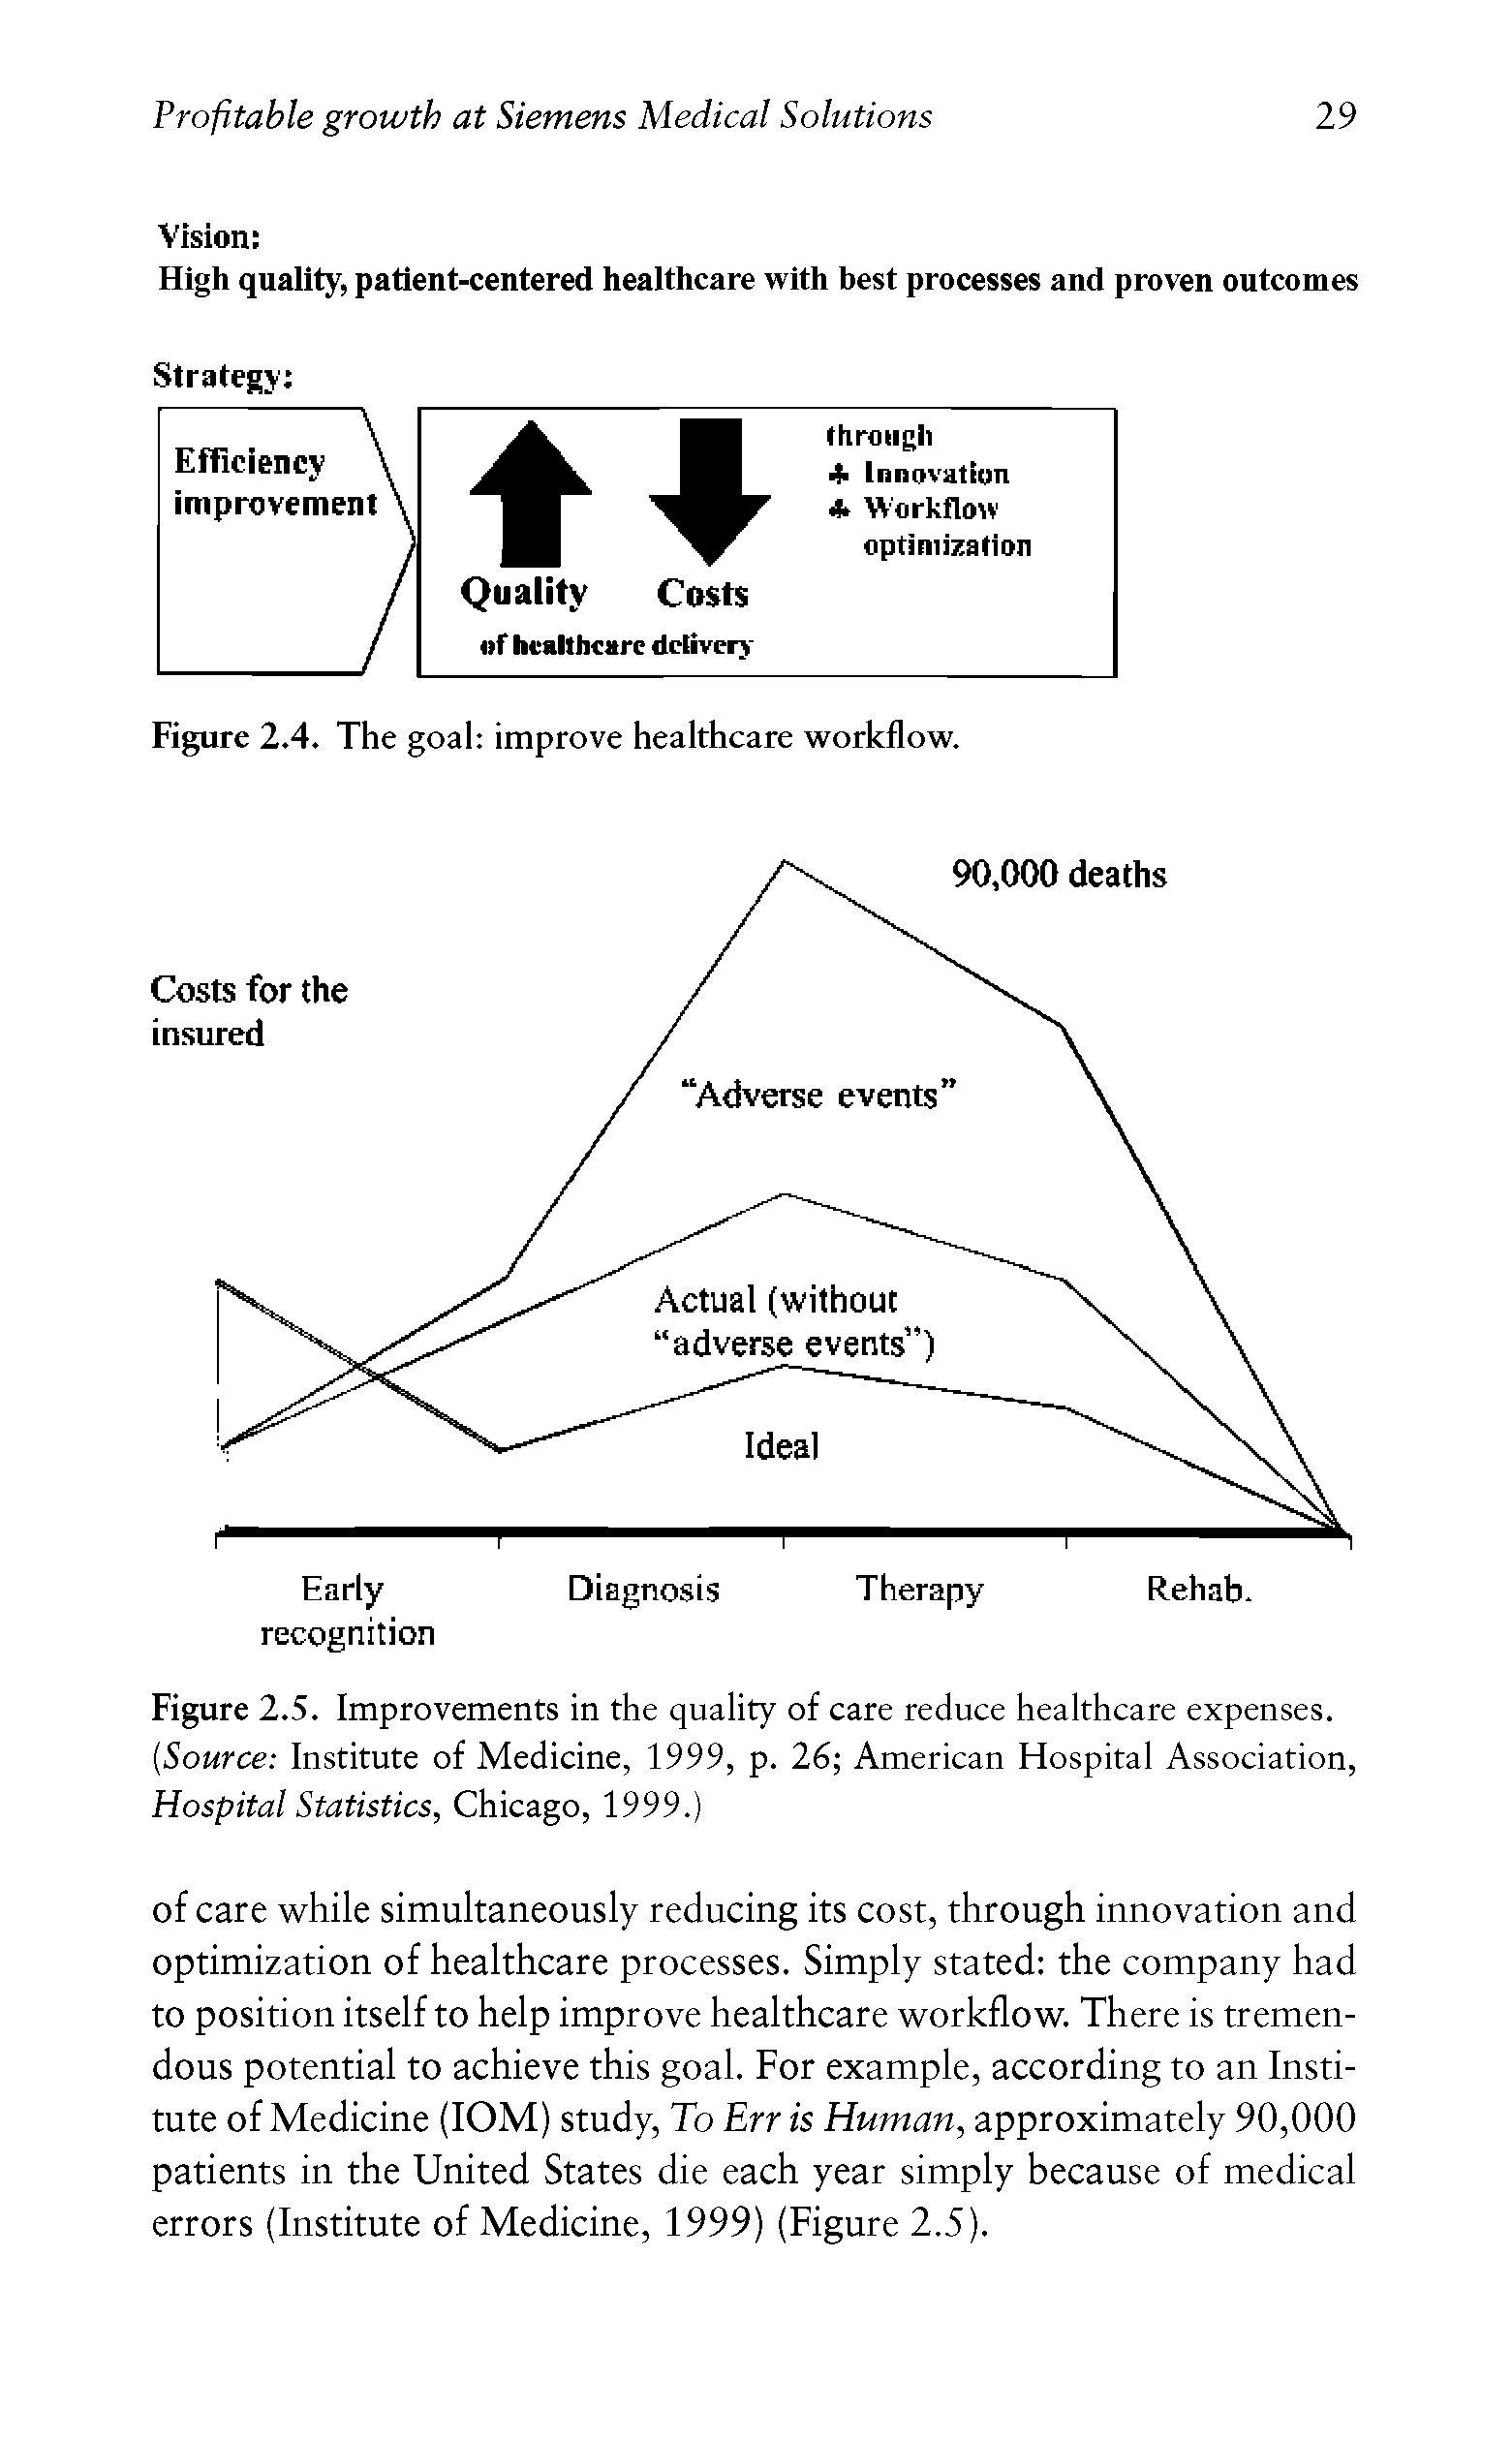 Figure 2.5. Improvements in the quality of care reduce healthcare expenses. [Source Institute of Medicine, 1999, p. 26 American Hospital Association, Hospital Statistics, Chicago, 1999.)...